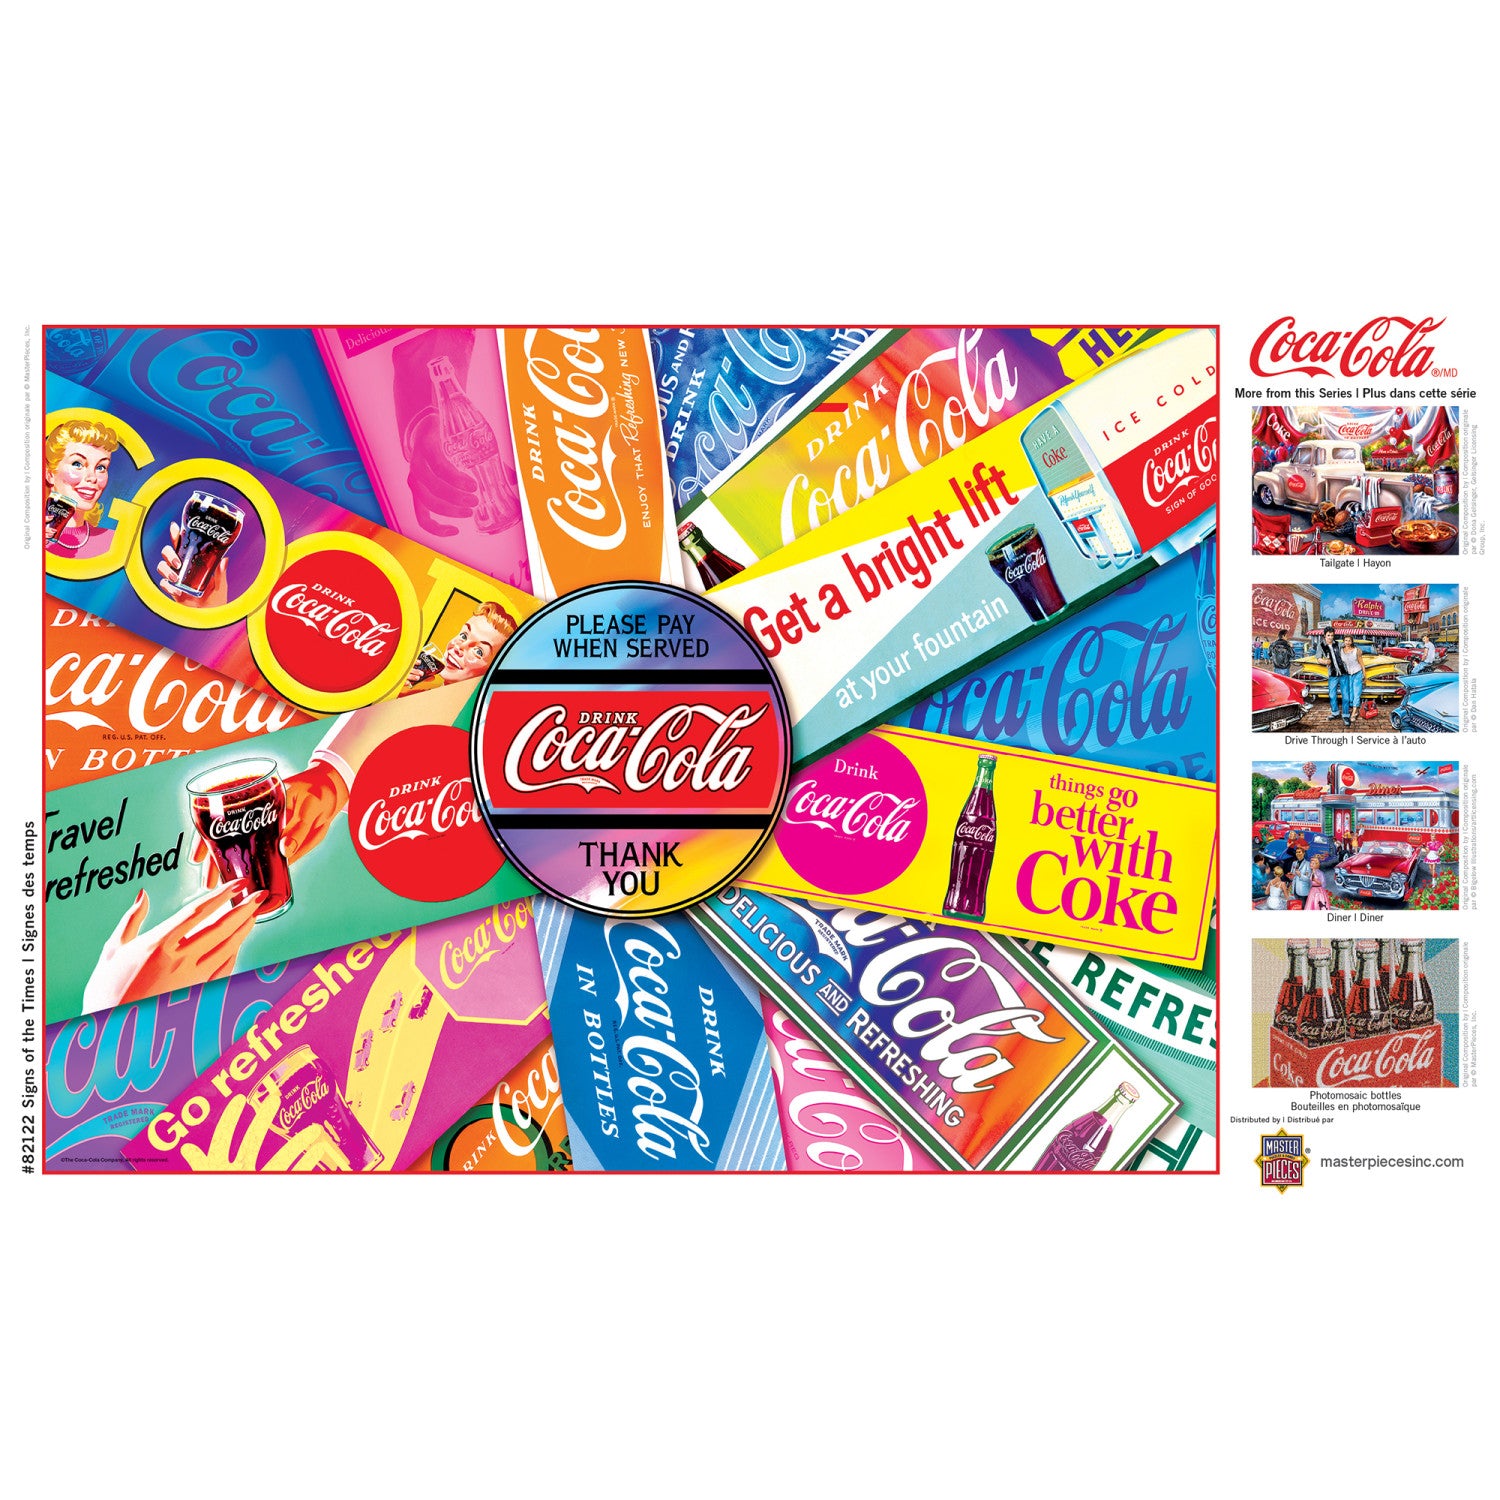 Coca-Cola - Signs of the Times 1000 Piece Jigsaw Puzzle